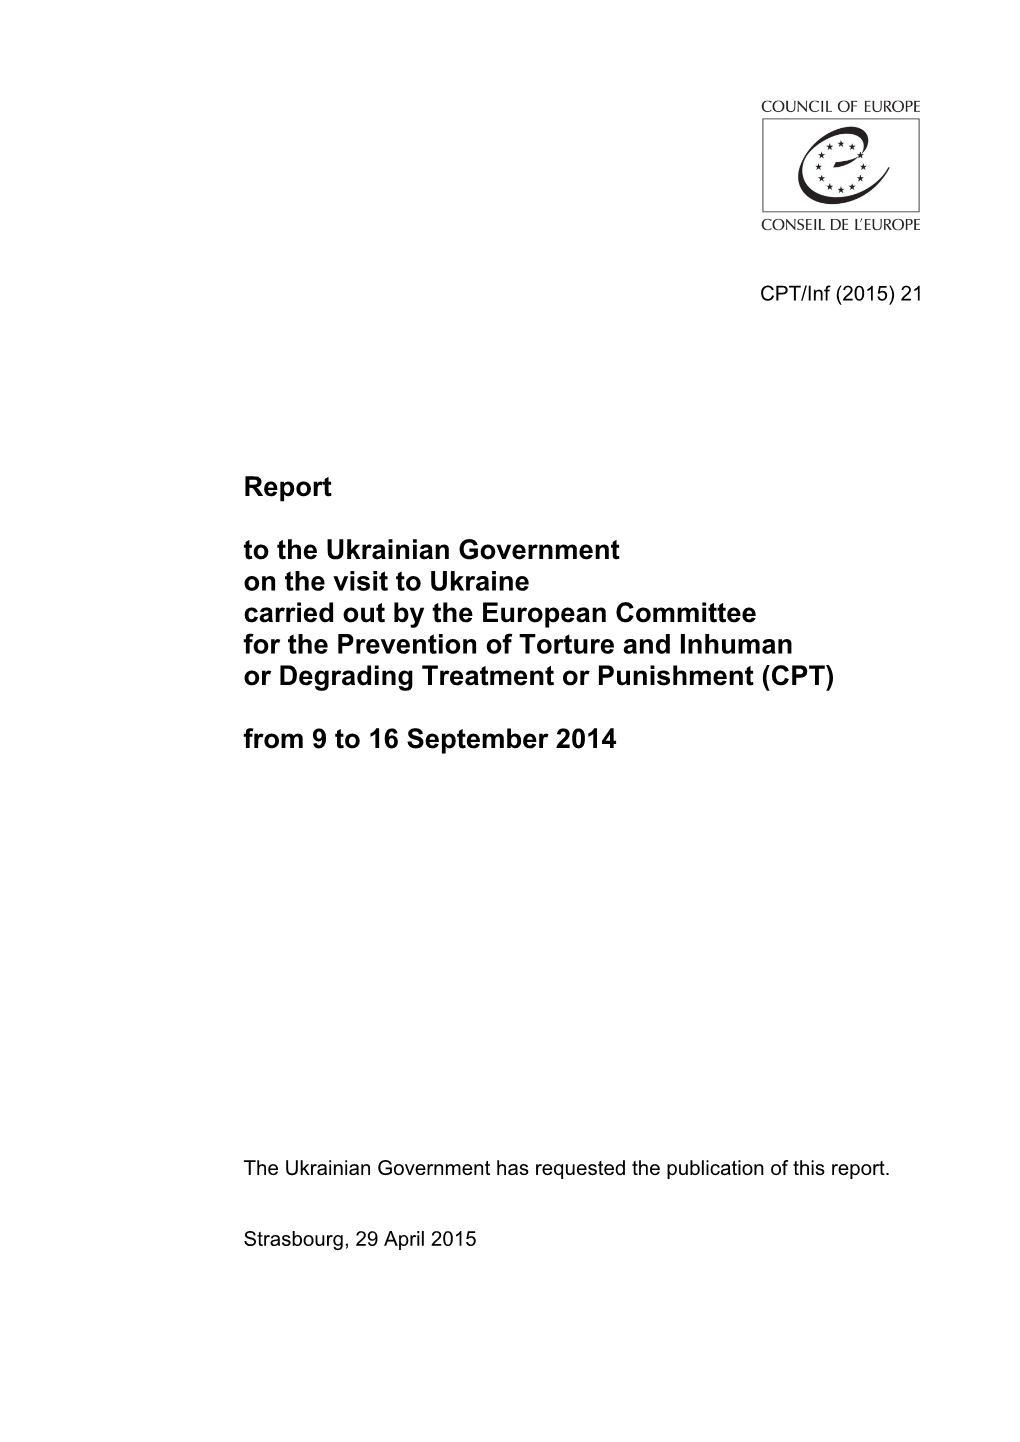 Report to the Ukrainian Government on the Visit to Ukraine Carried out By